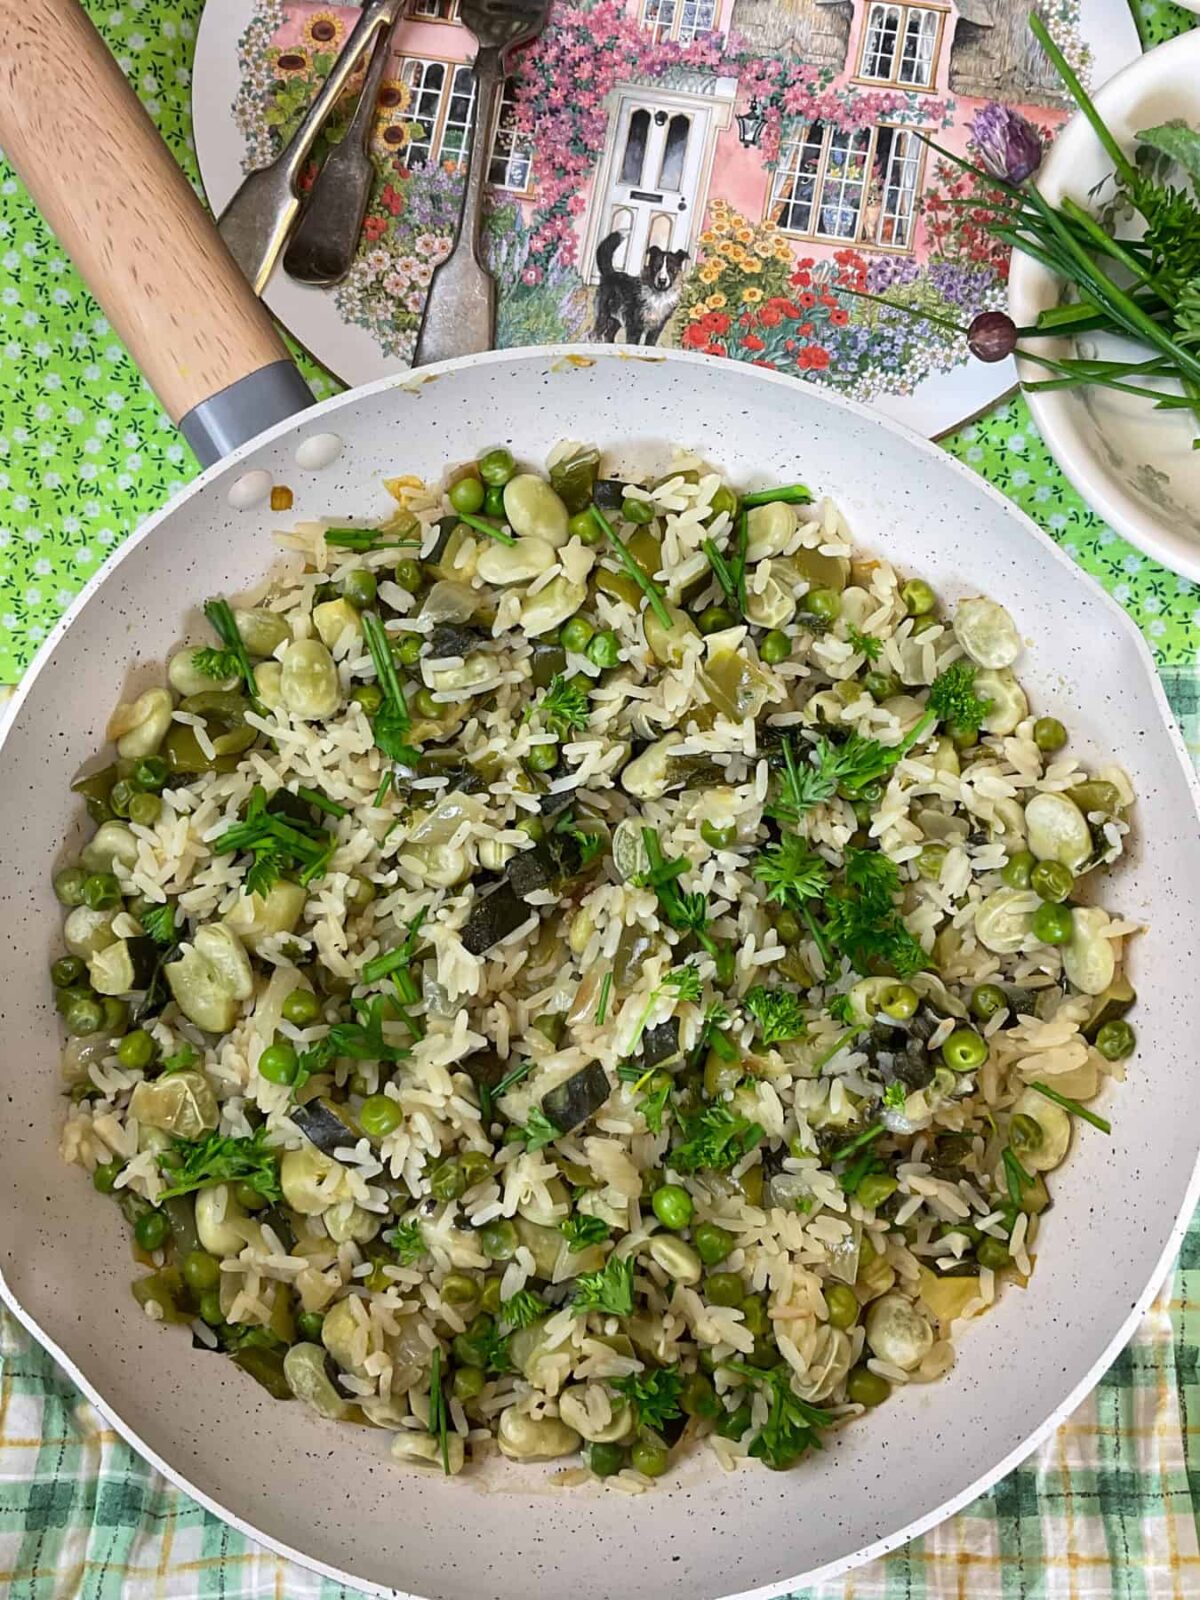 A pan with cooked British pea and broad bean pilaf ready to serve with green and white check tablemat, chopping board to background with cottage and flower image, small dish to side with fresh herbs.